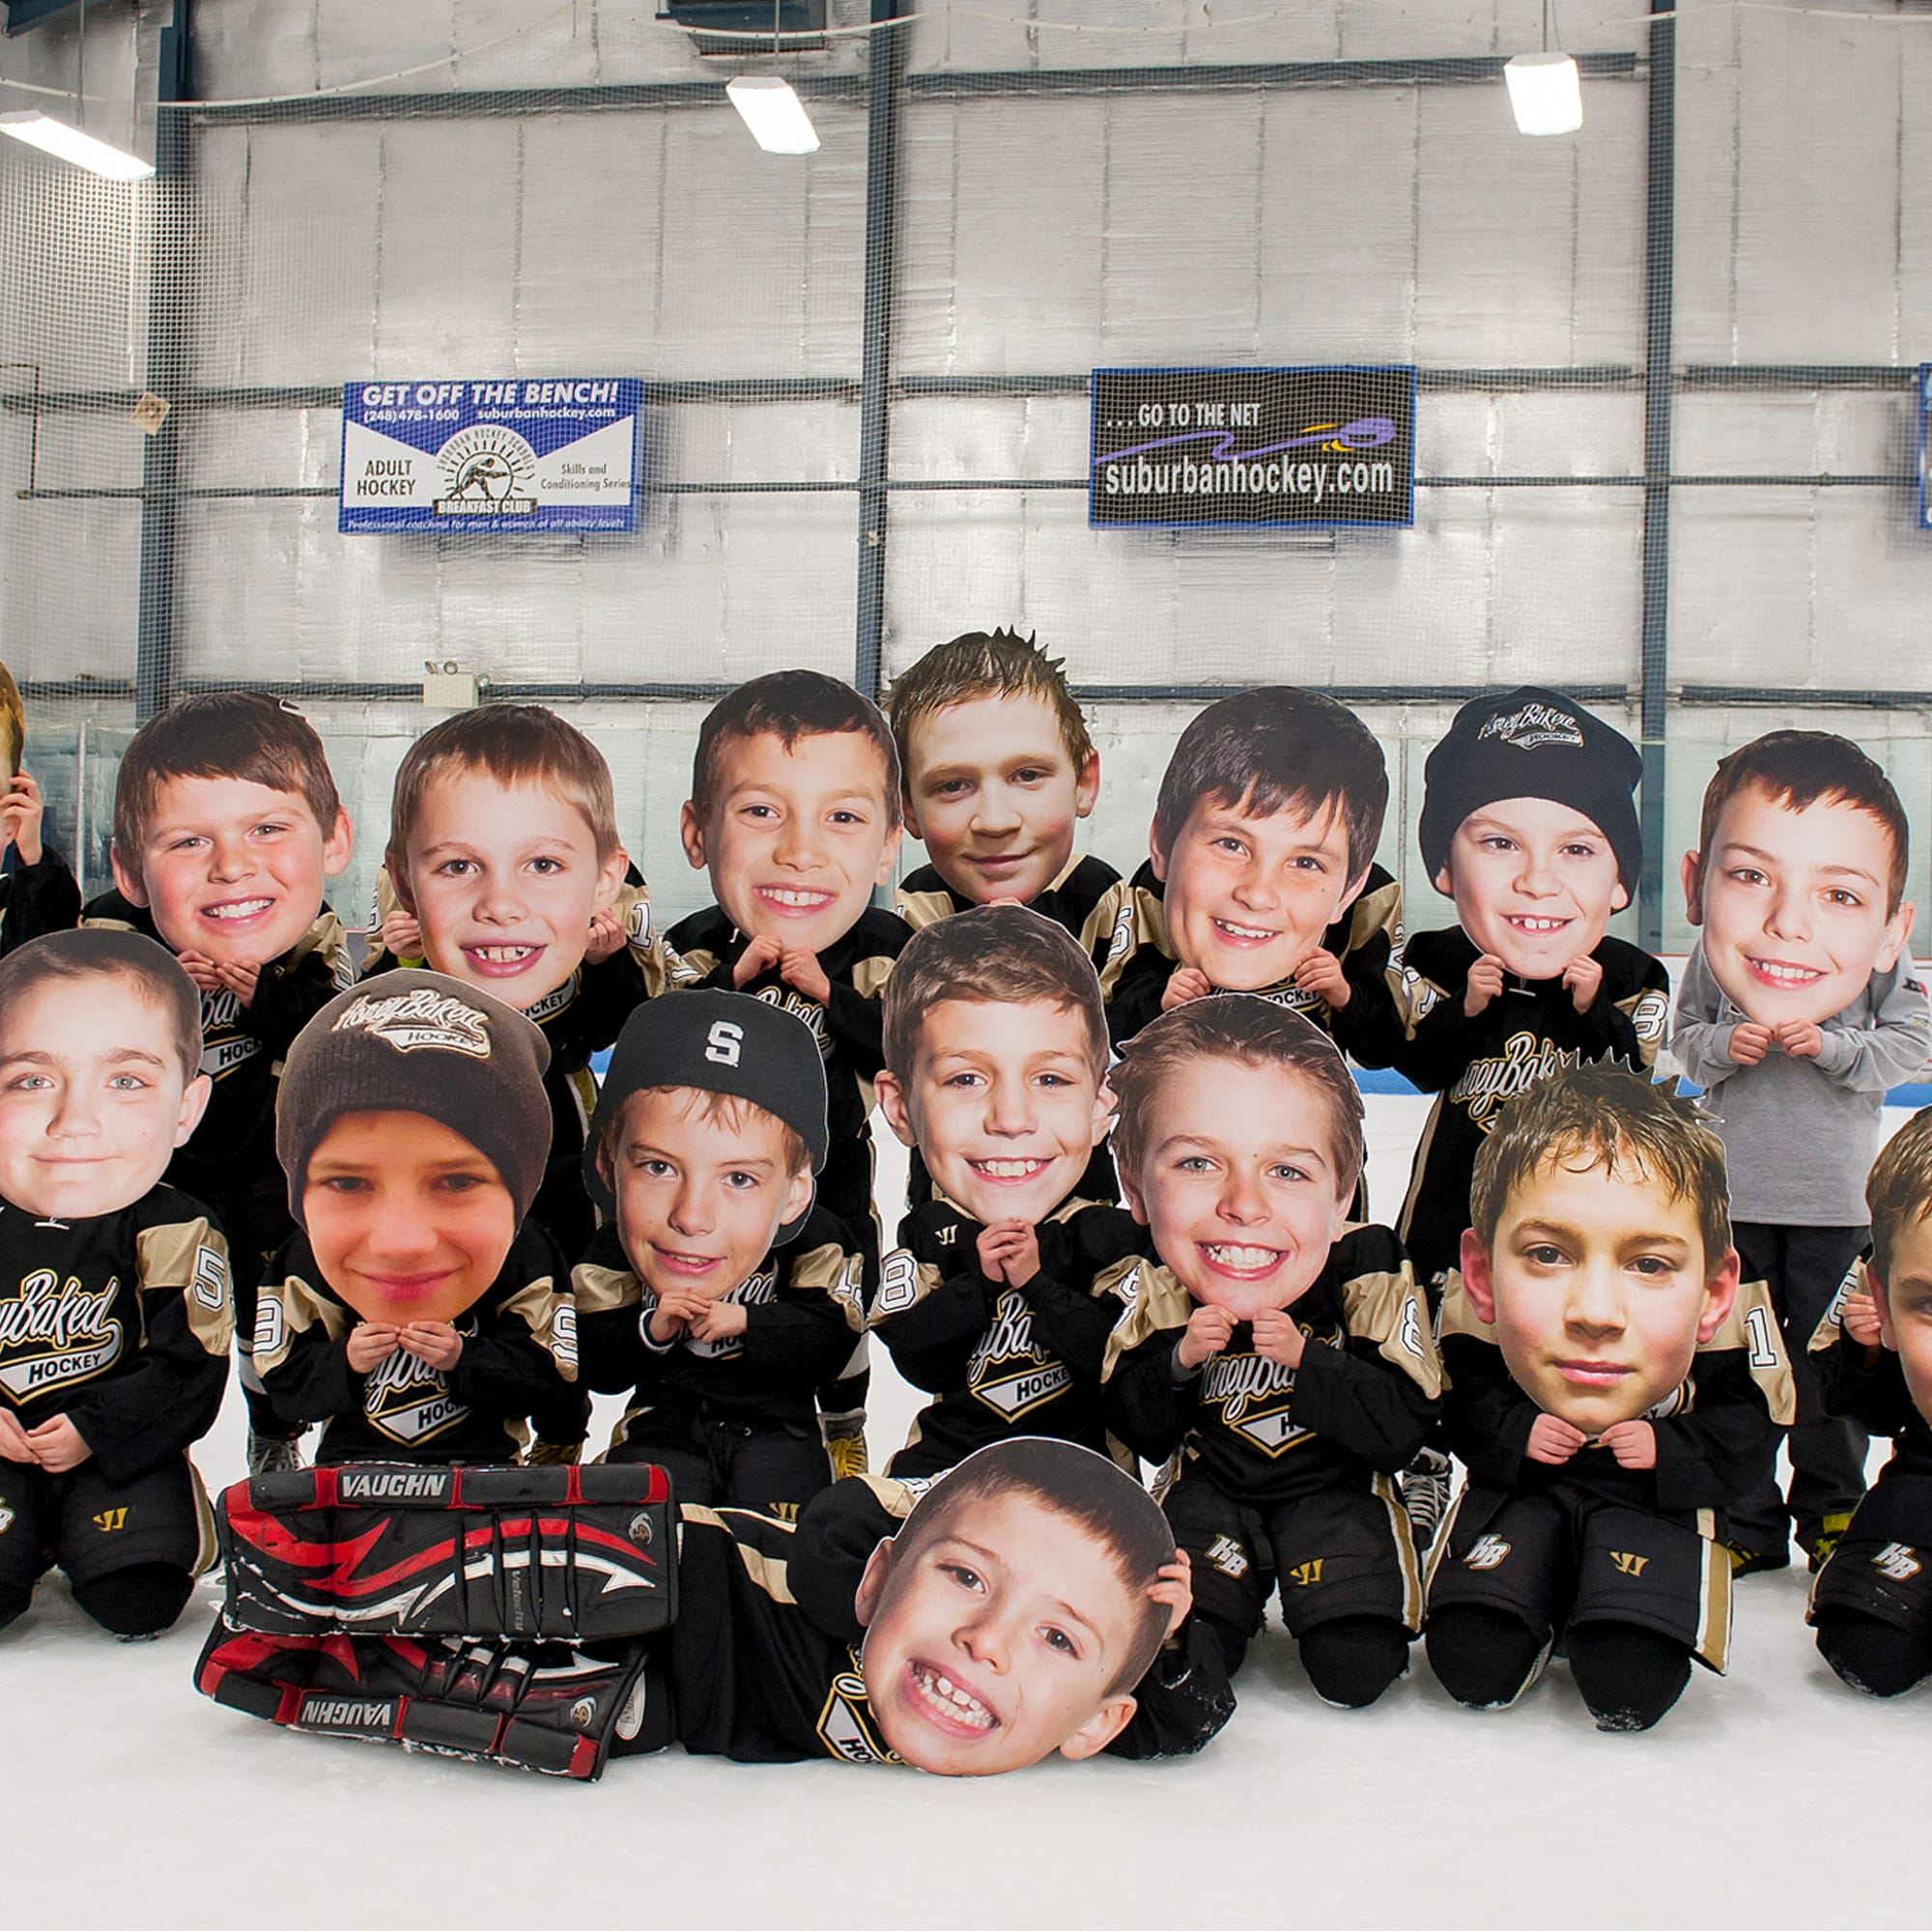 Fun gifts for swimmers include big head cutouts - you can purchase or make your own!